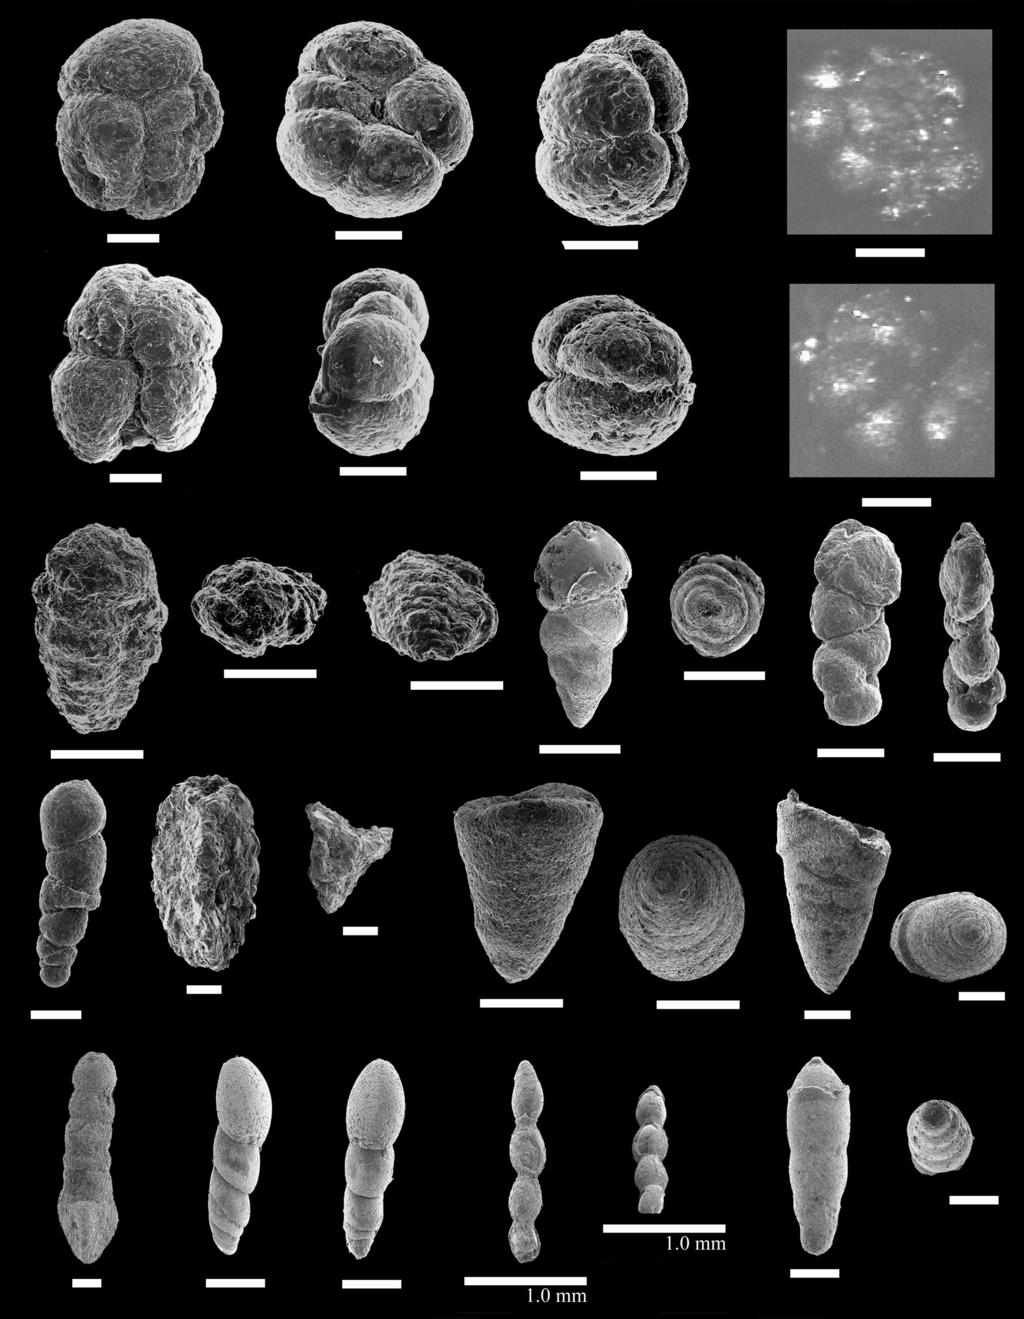 PATTERSON, HAGGART, & DALBY: CRETACEOUS FORAMINIFERA OF B.C. FIGURE 7. All scale bars = 100 um, unless otherwise indicated. 1, 2, Trochammina wetteri Stelck and Wall 1955, GSC No.